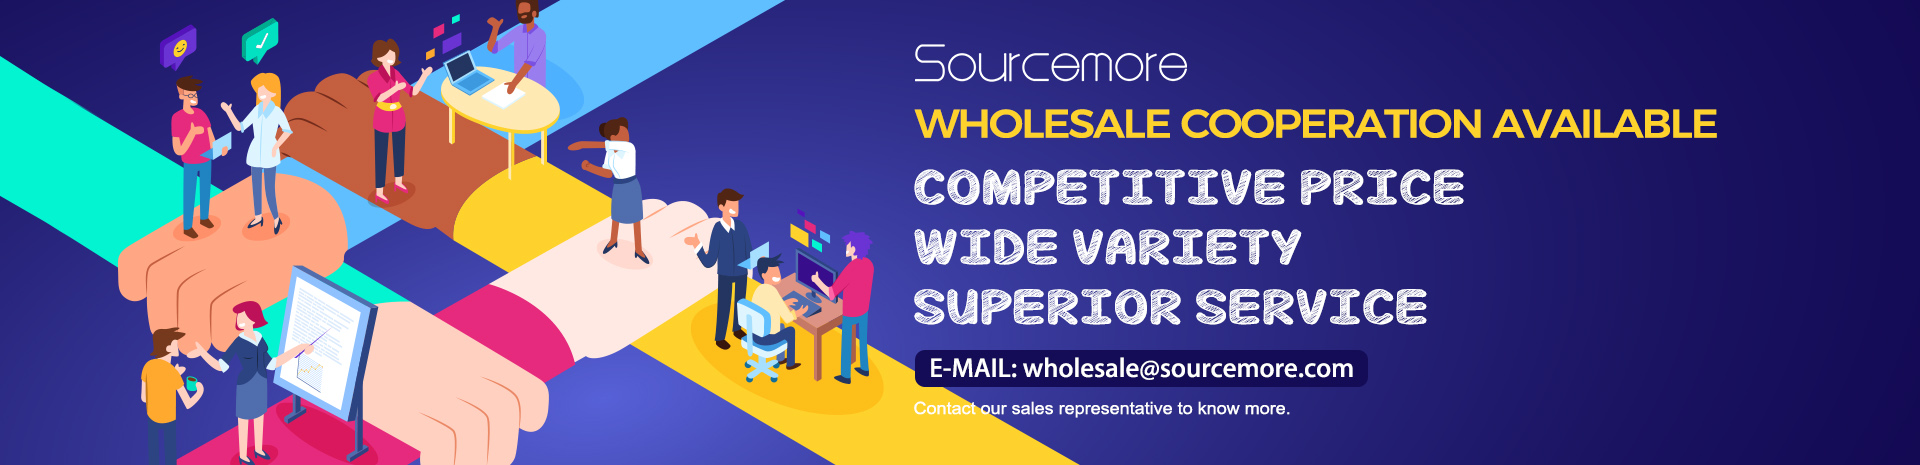 Sourcemore Wholesale Available